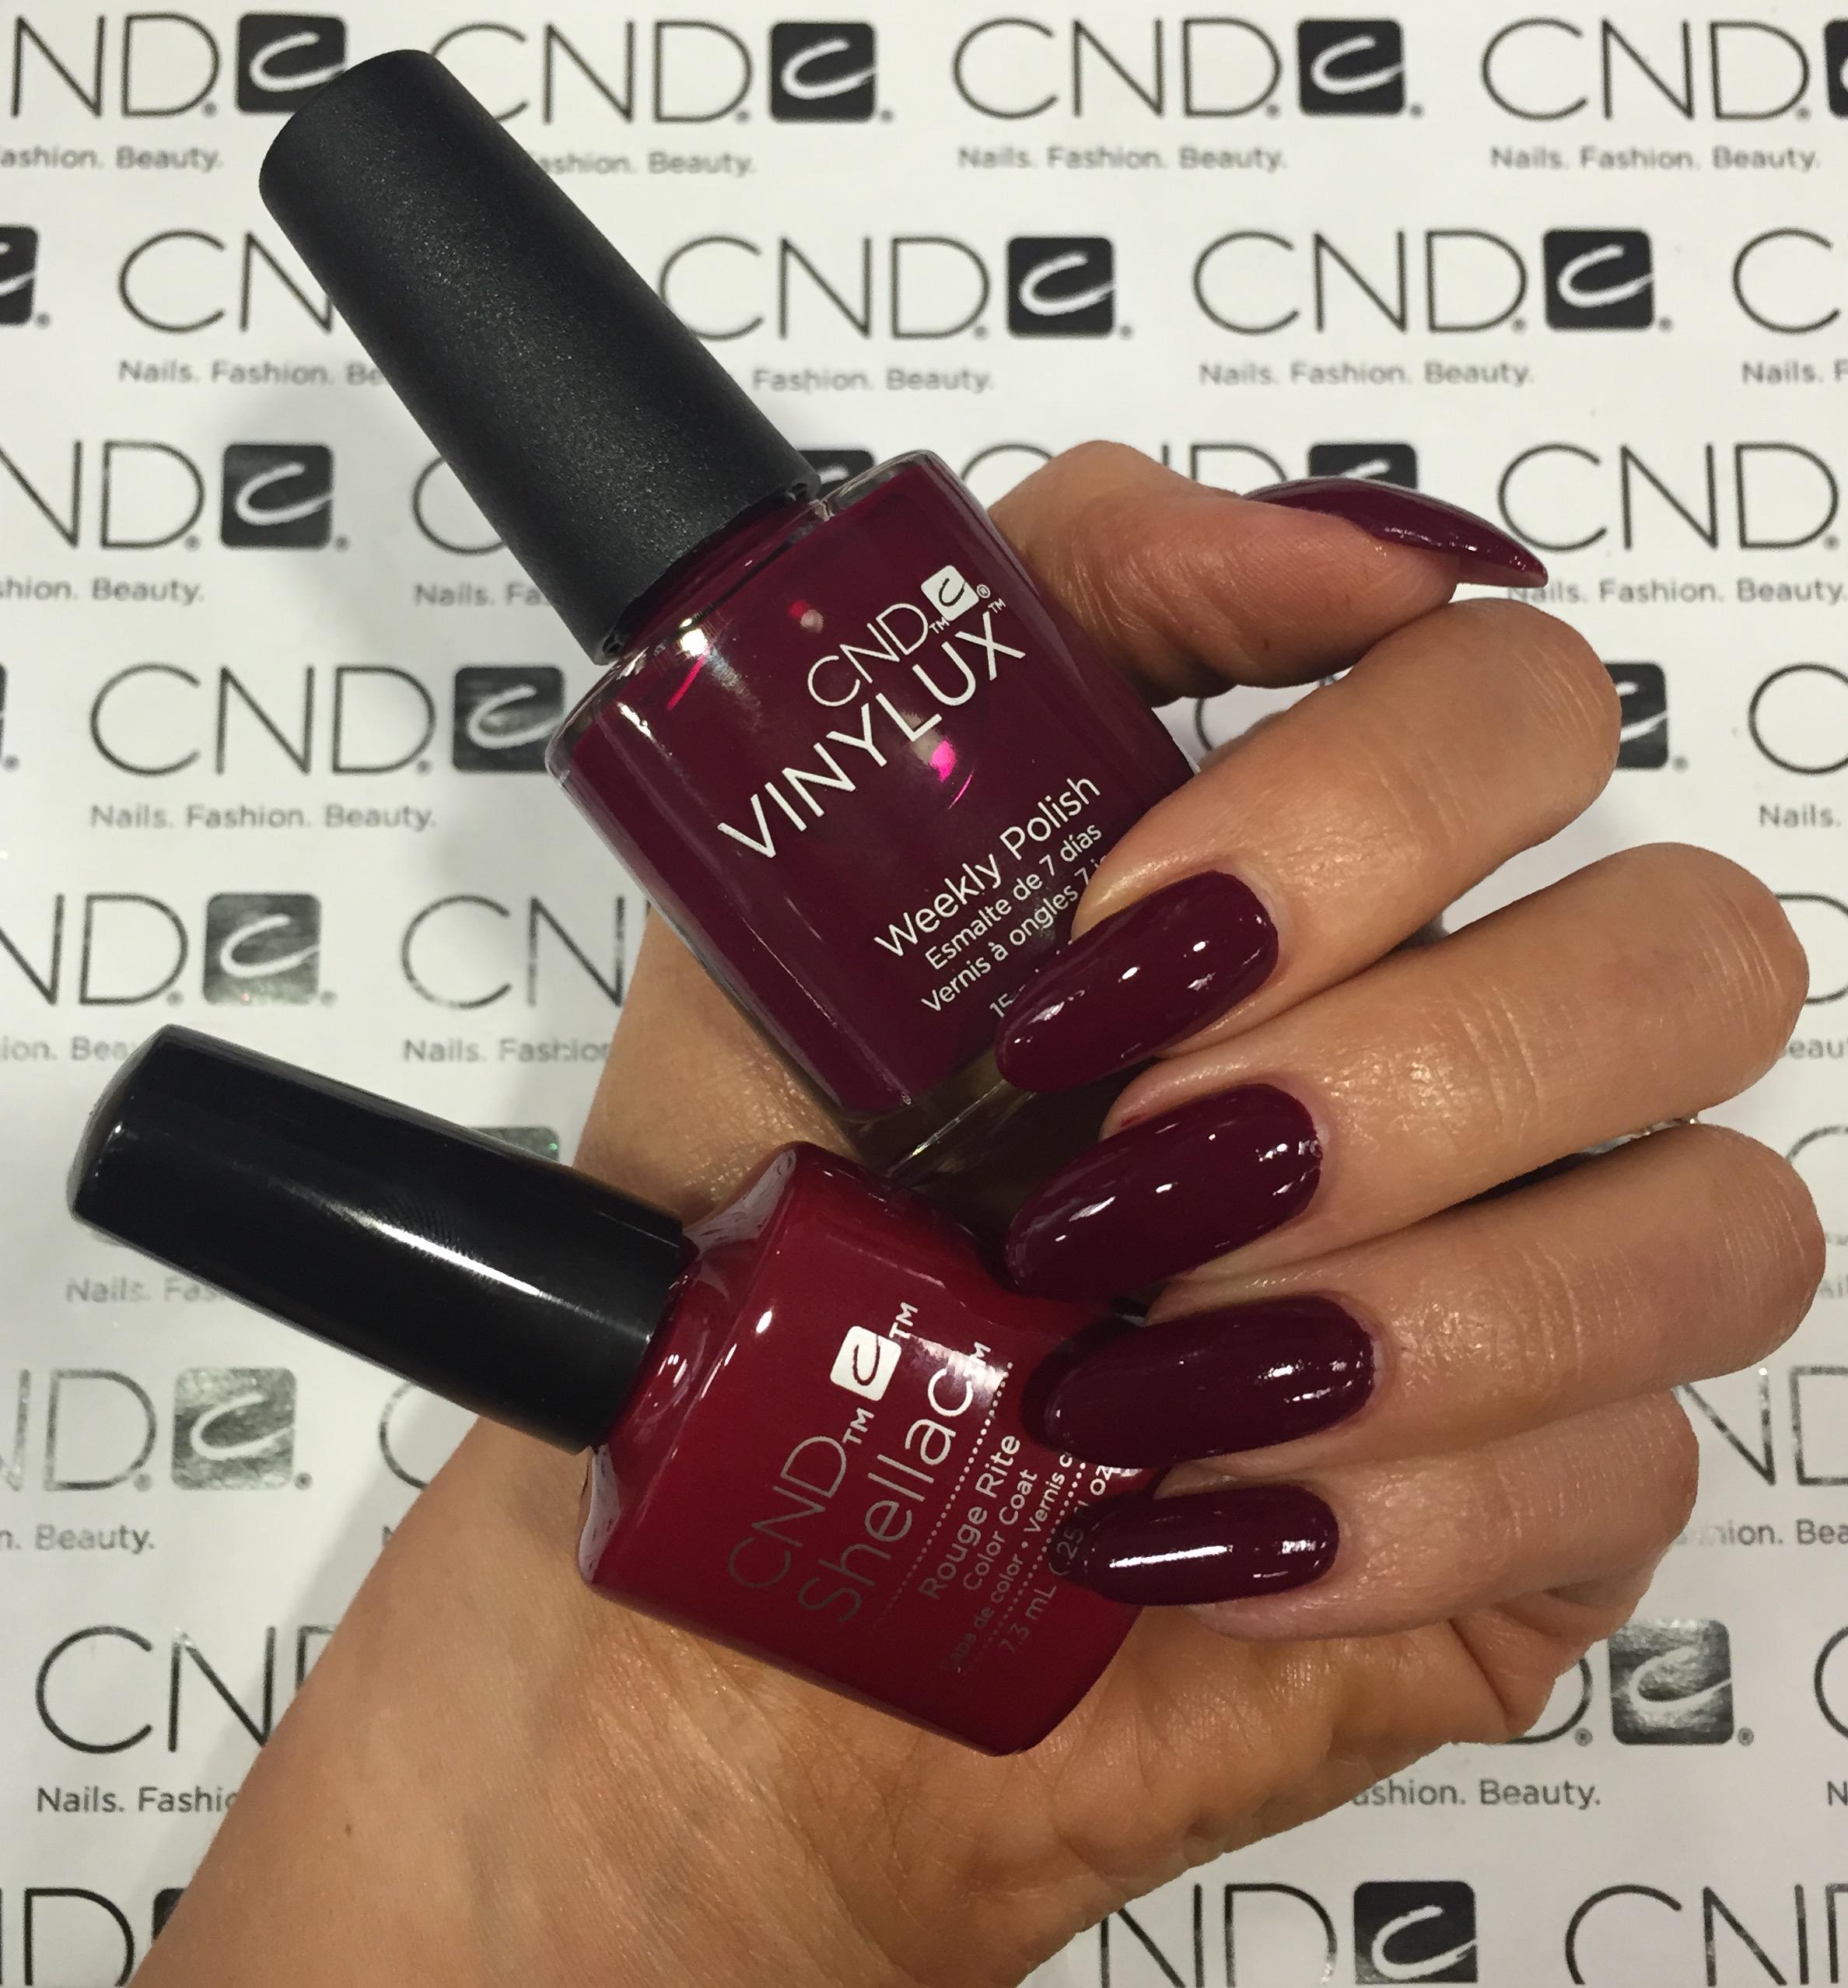 Sweet Squared on Twitter: "Take a peek at the fabulous Rouge Rite from the  new CND™ Contradictions Collection! #CNDnails #shellac #vinylux  http://t.co/IzIricVkHy" / Twitter